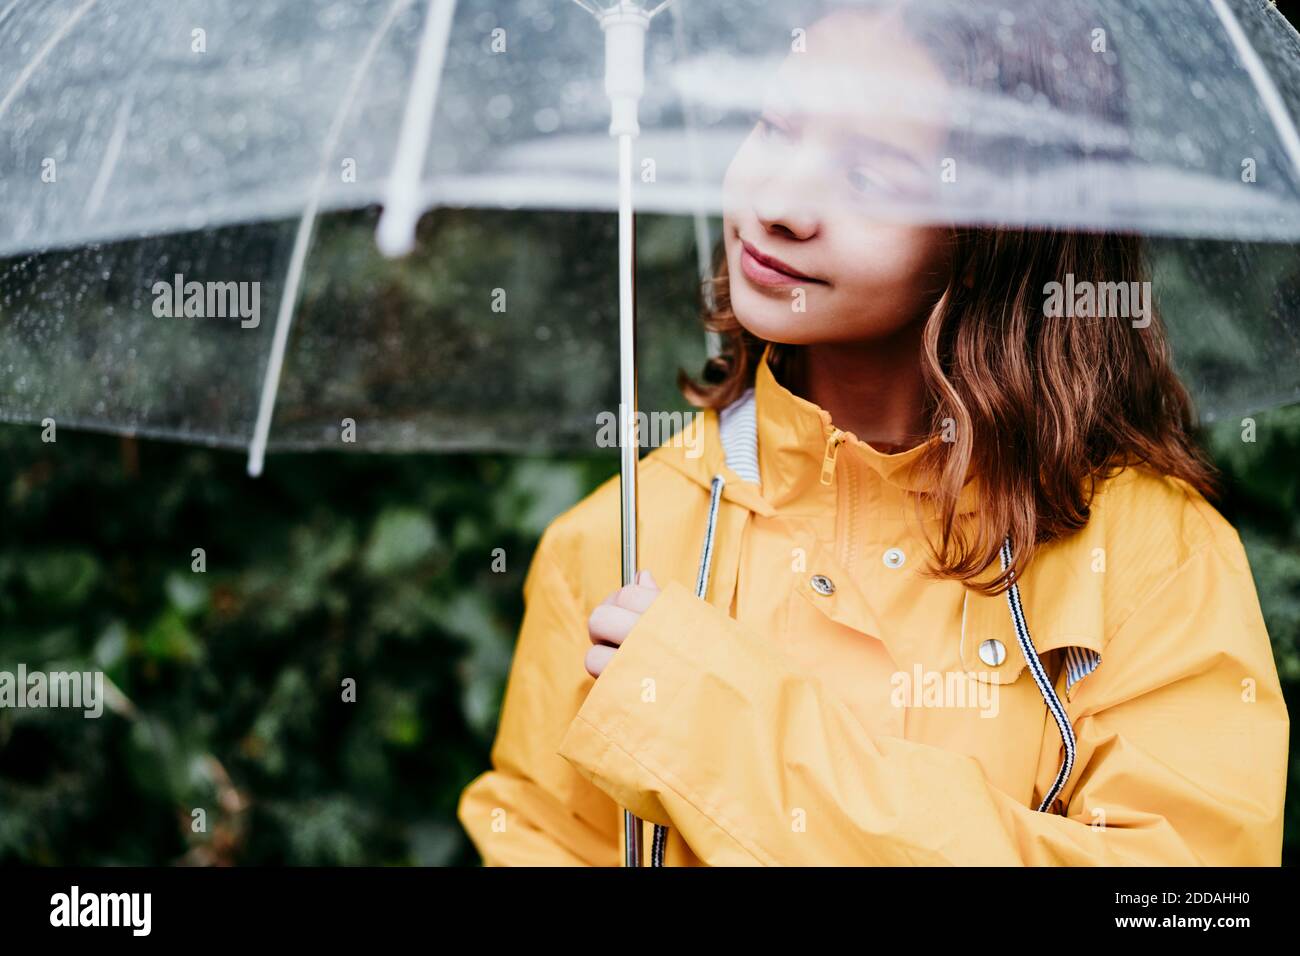 Girl in raincoat looking away while standing under umbrella outdoors Stock Photo